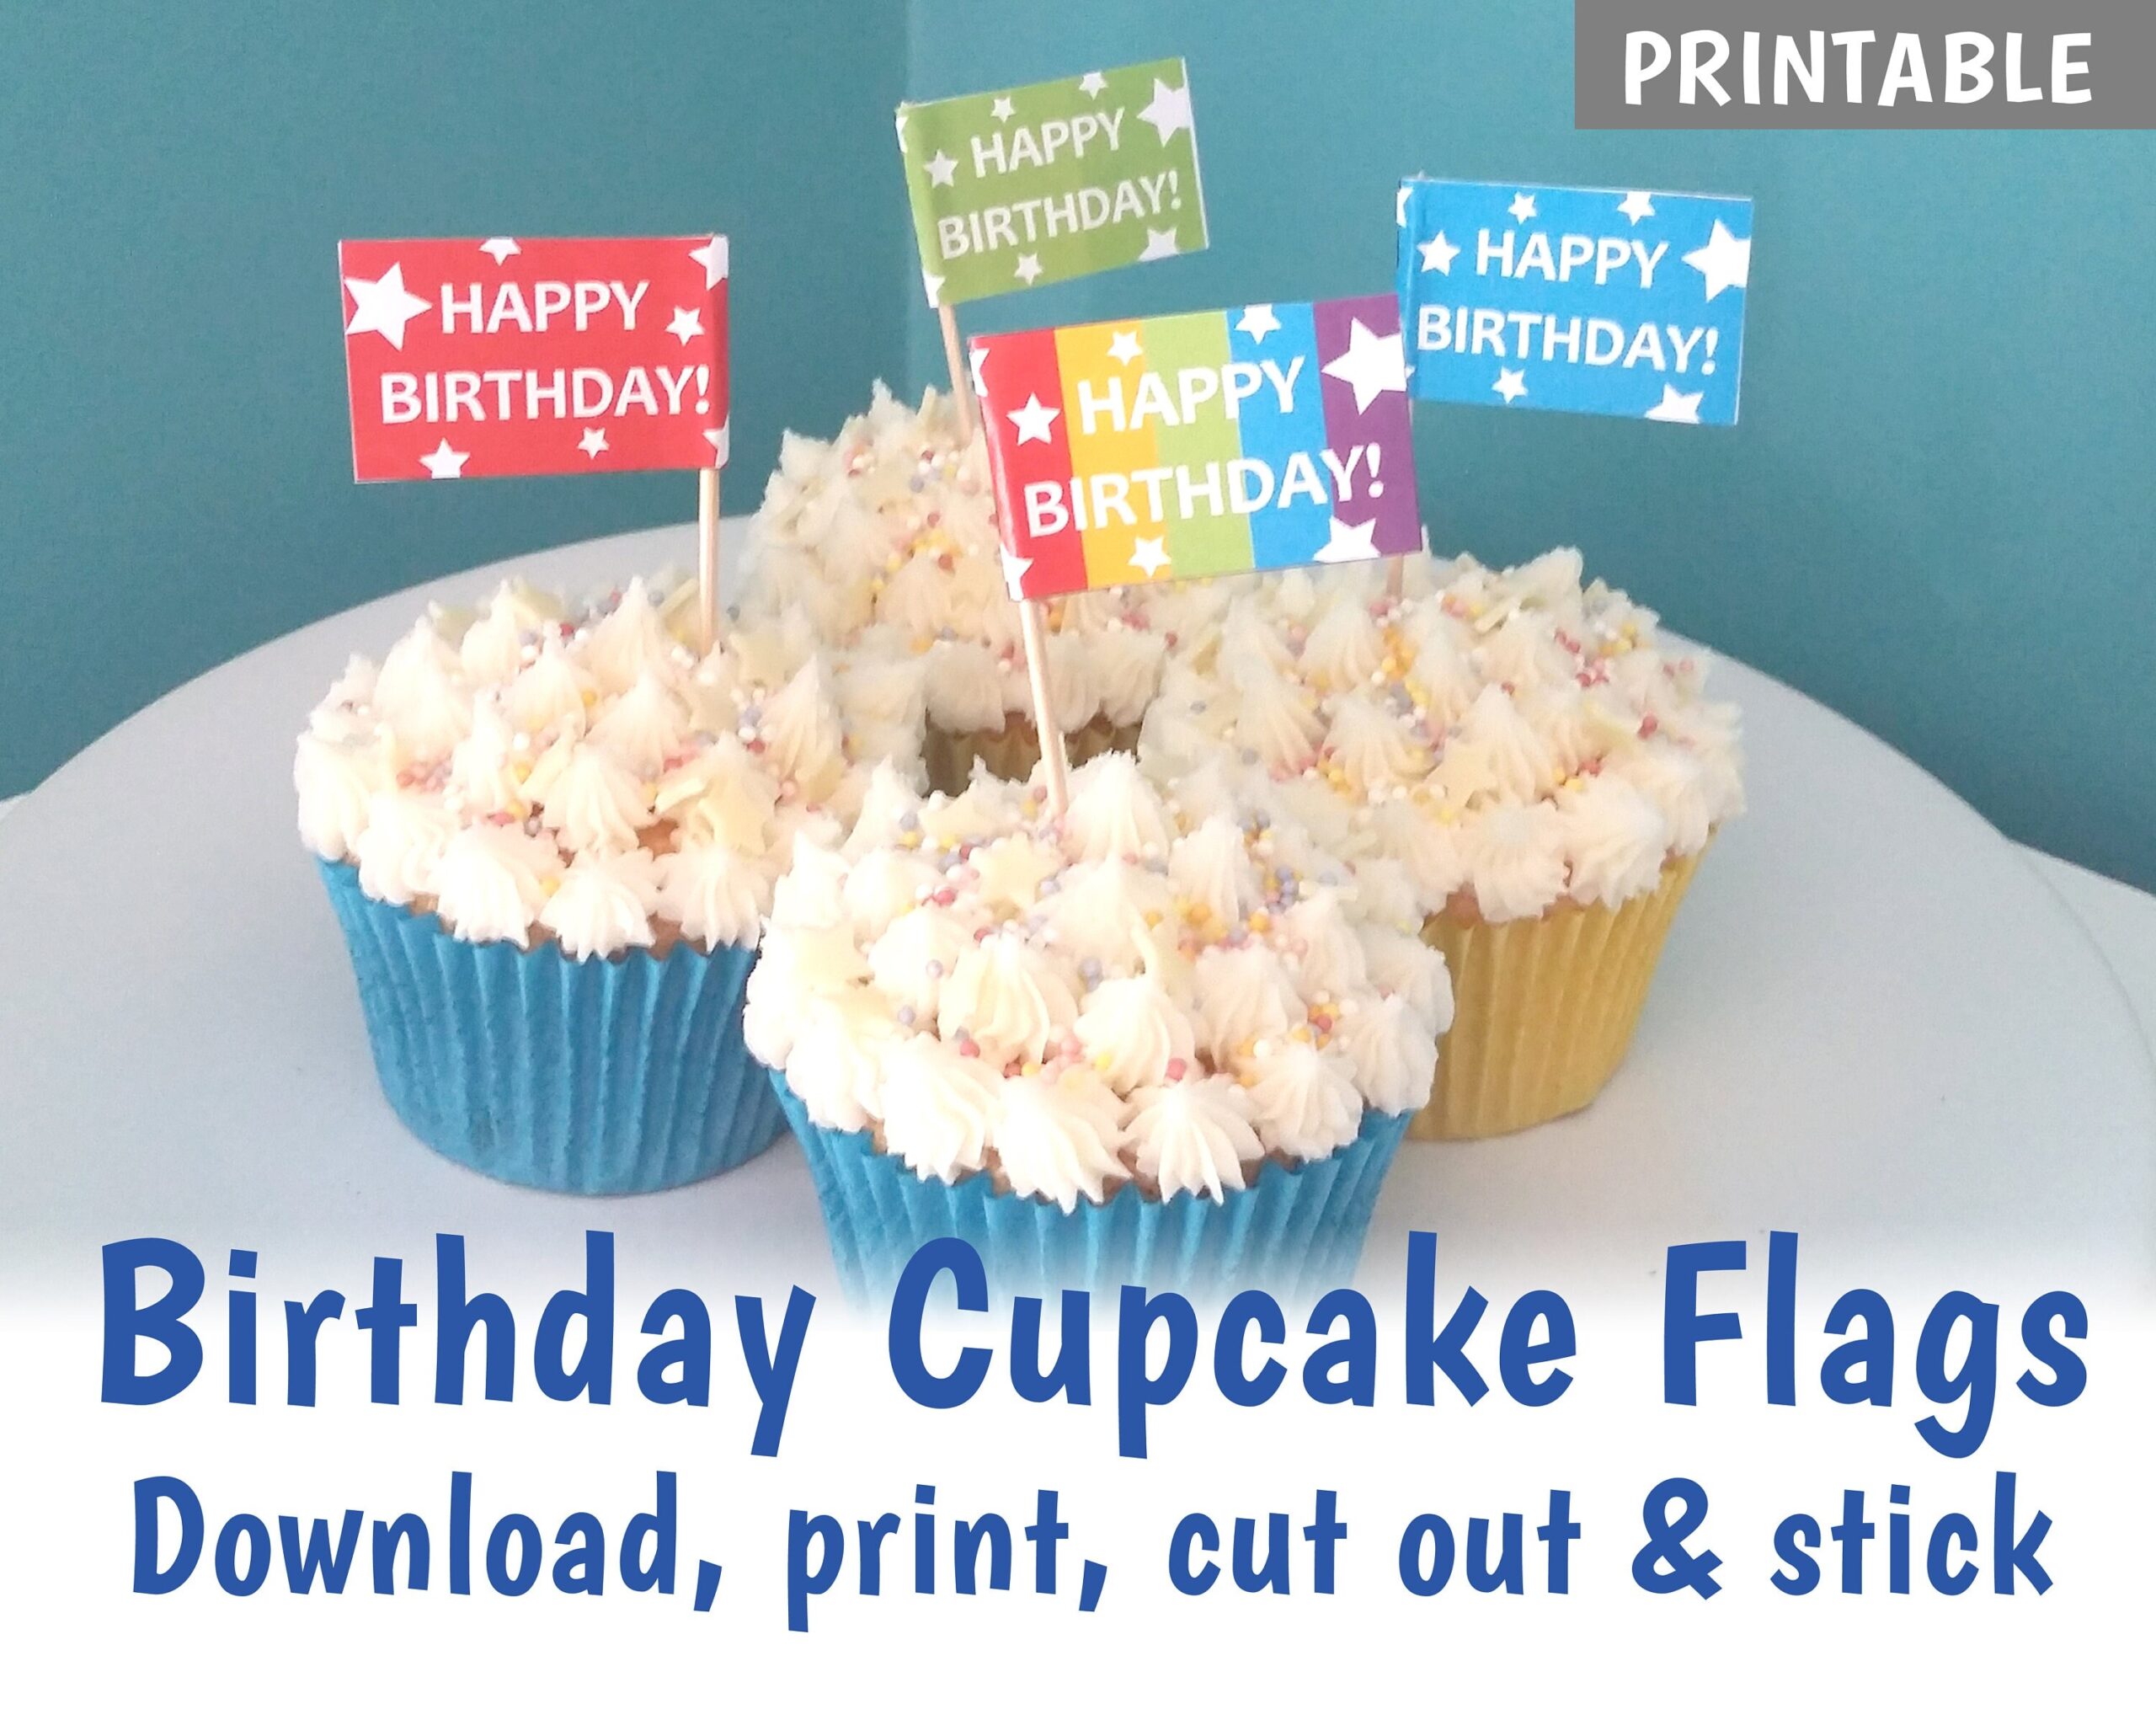 PRINTABLE Birthday Cupcake Flags Make Your Own Cake Toppers Brightly Coloured Rainbow Party Cake Decorations DOWNLOAD Etsy - Cupcake Flags Printable Free